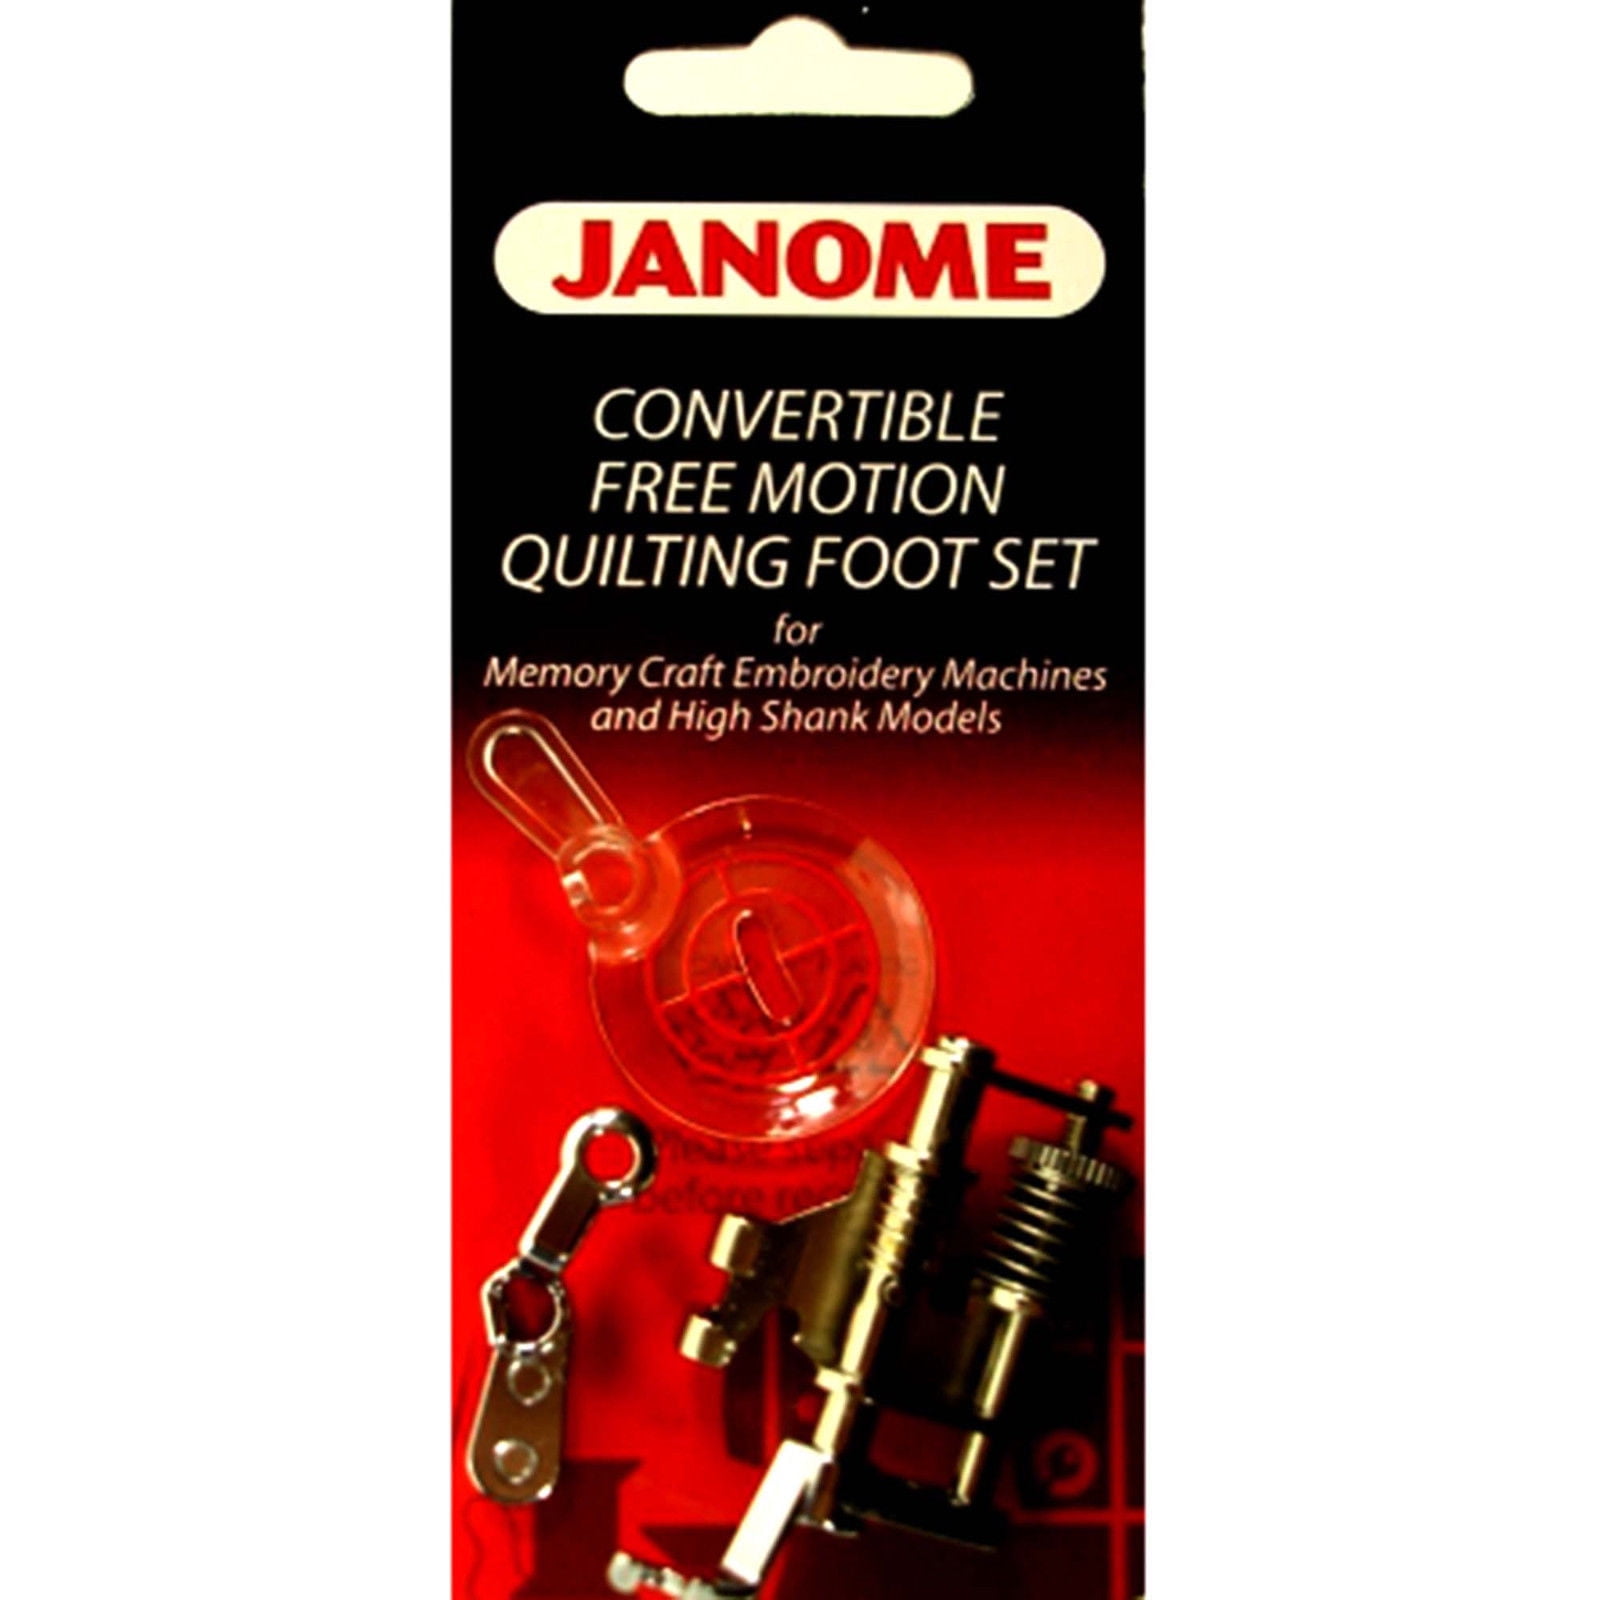 CONVERTIBLE FREE MOTION QUILTING FOOT SET FITS JANOME ELNA HIGH SHANK SEWING 